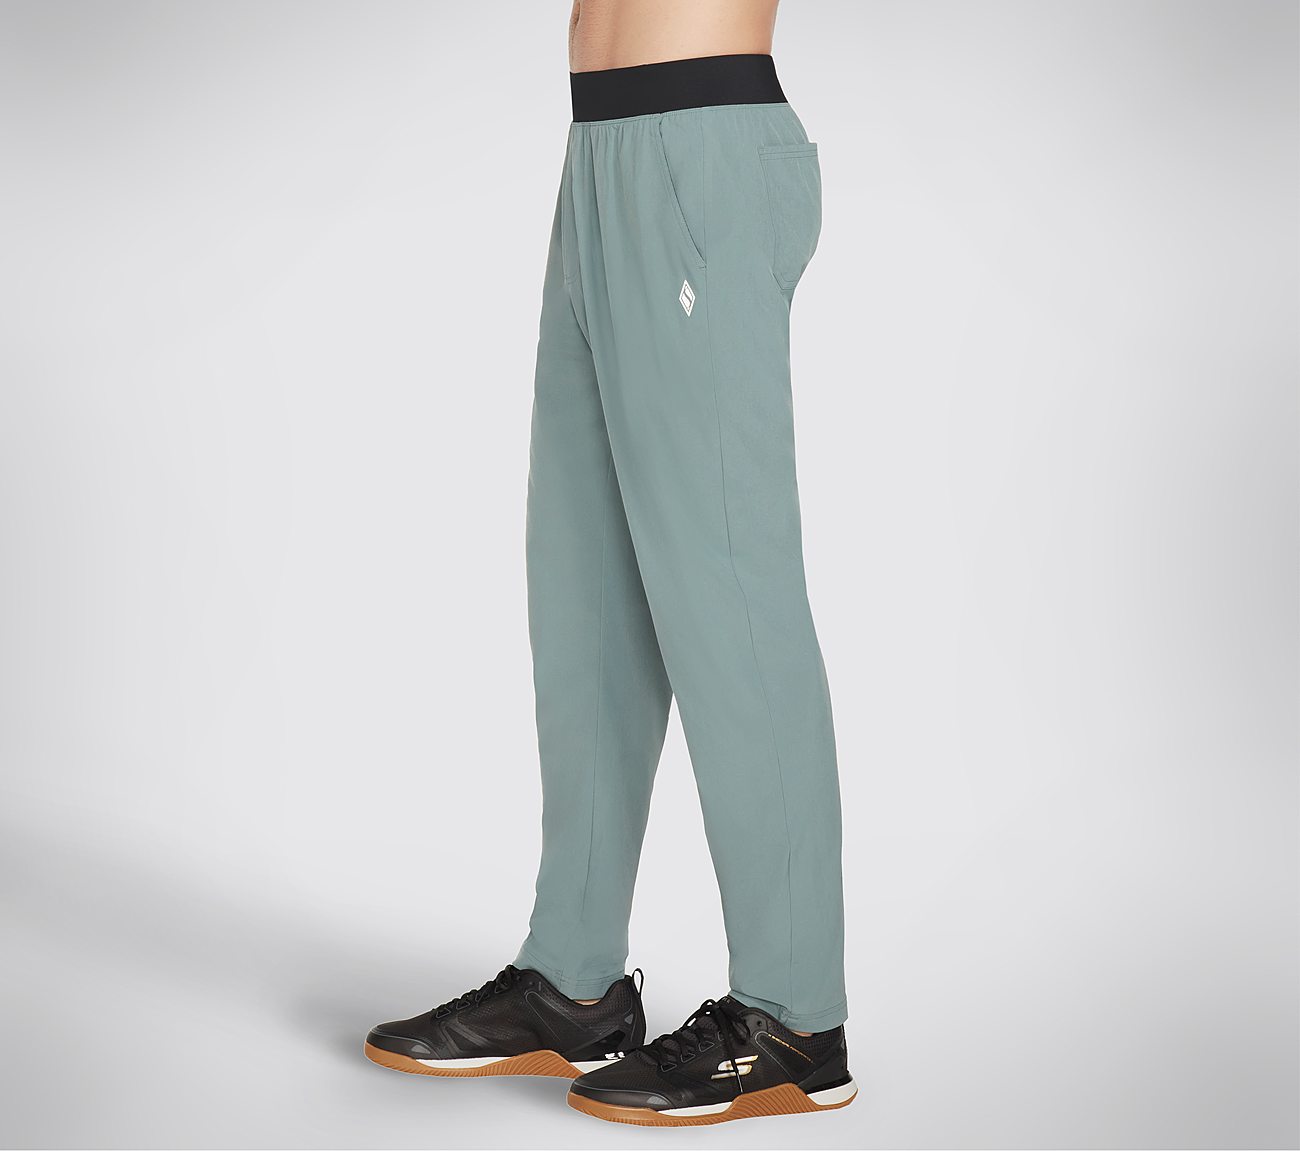 GO WALK ACTION PANT, TEAL/BLUE Apparels Bottom View